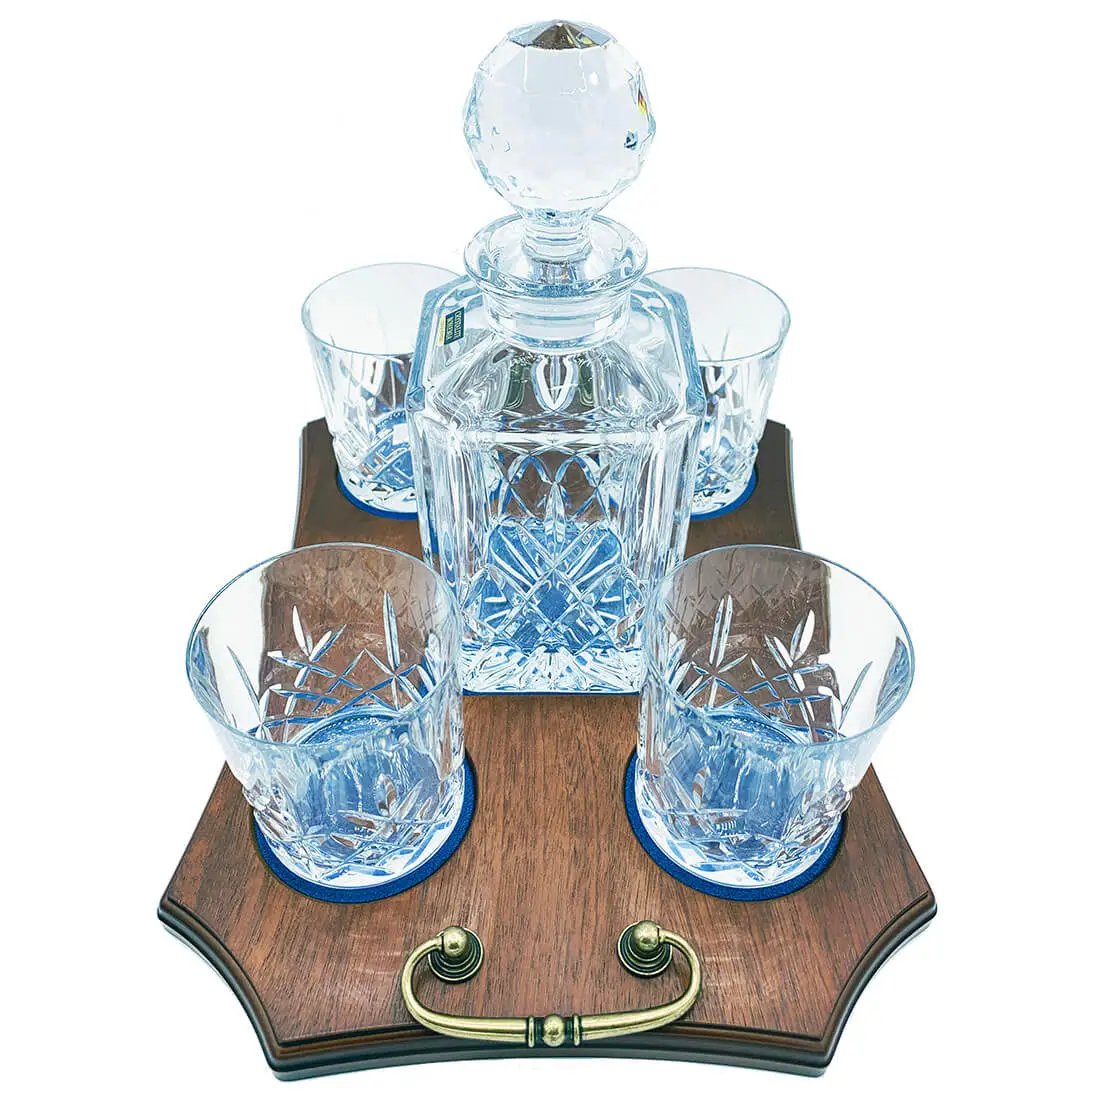 Crystal Whisky Decanter Set with 4 Glasses - John Bull Clothing